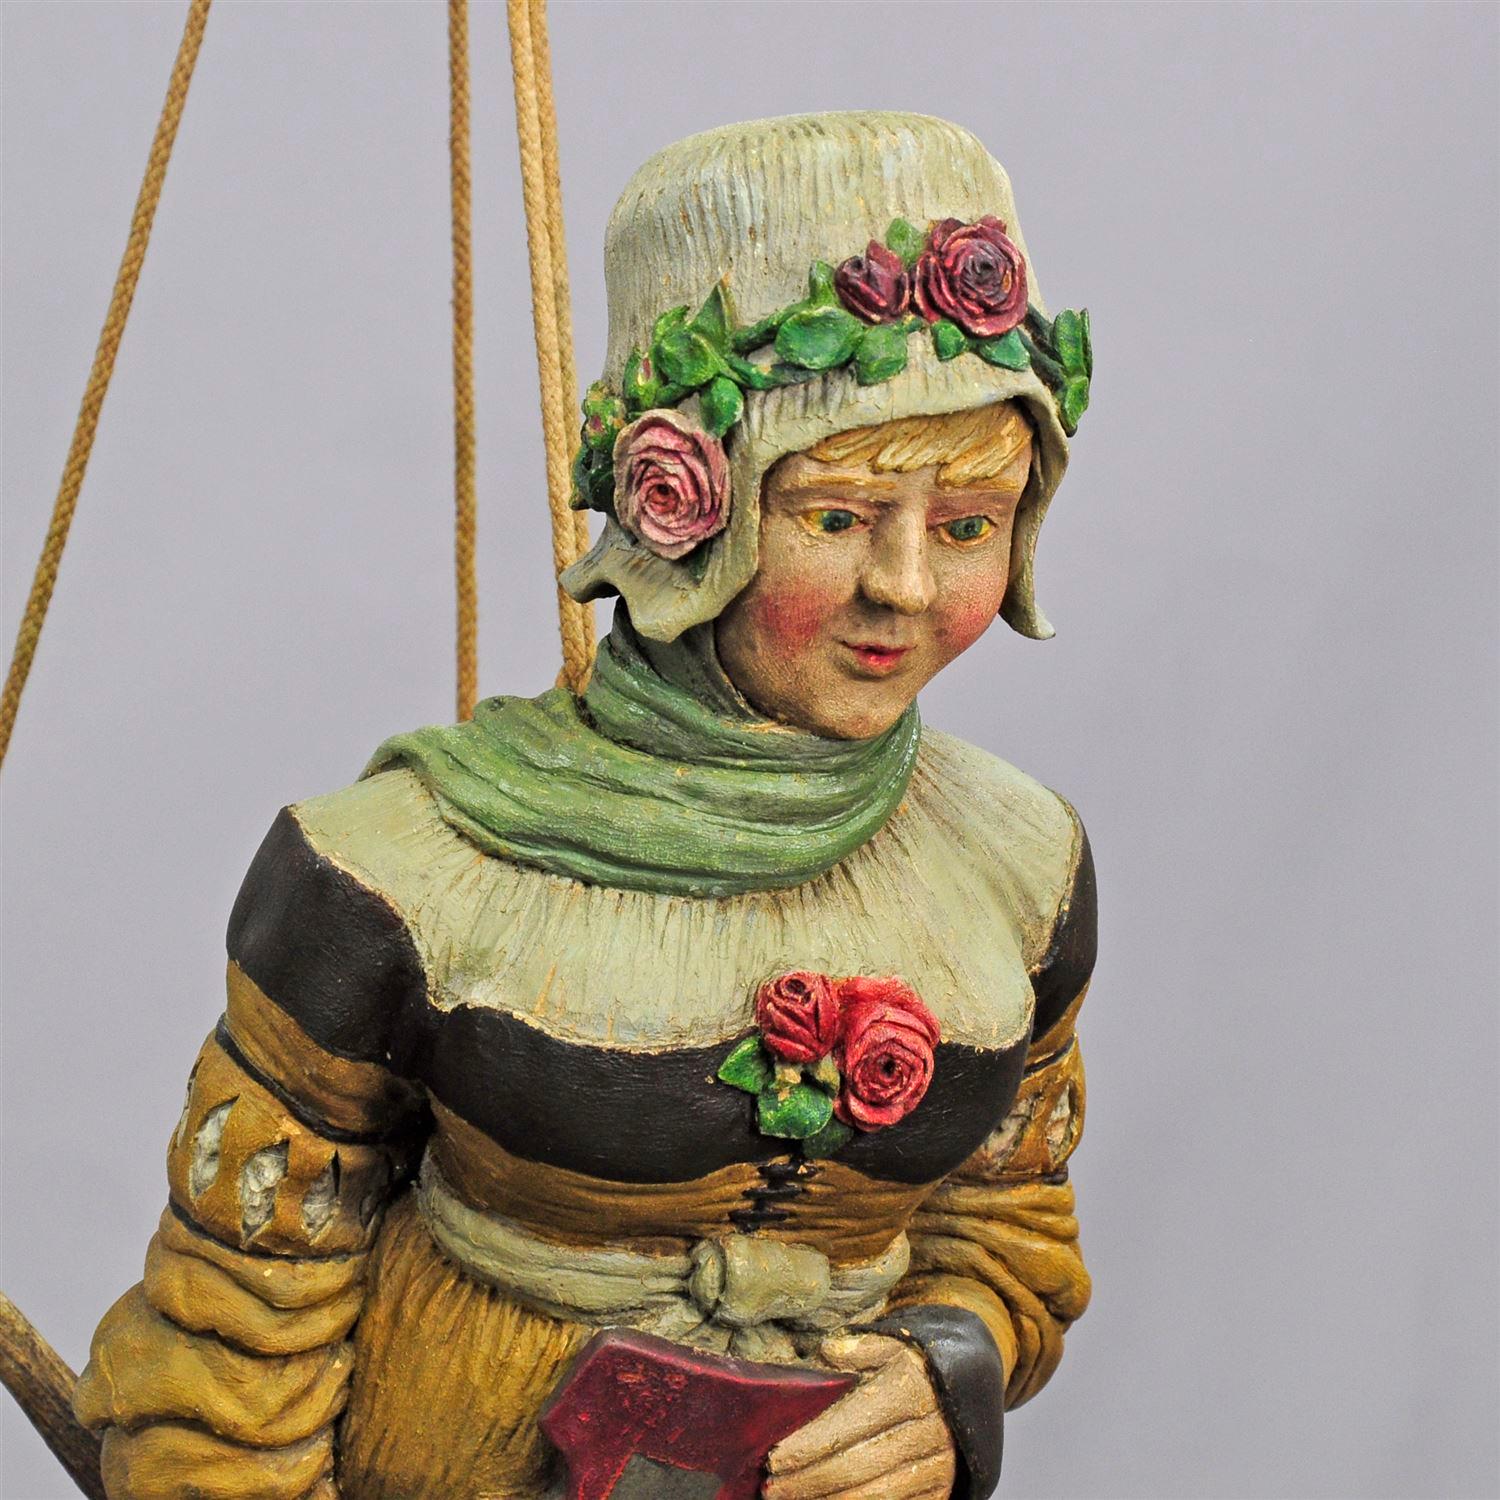 A beautiful lusterweibchen with handsome hand-carved and hand-painted wooden lady carrying a blazon. The lady is wearing a playful head with red roses and the wooden body of the sculpture is fastened to impressive real fallow deer antlers. Executed